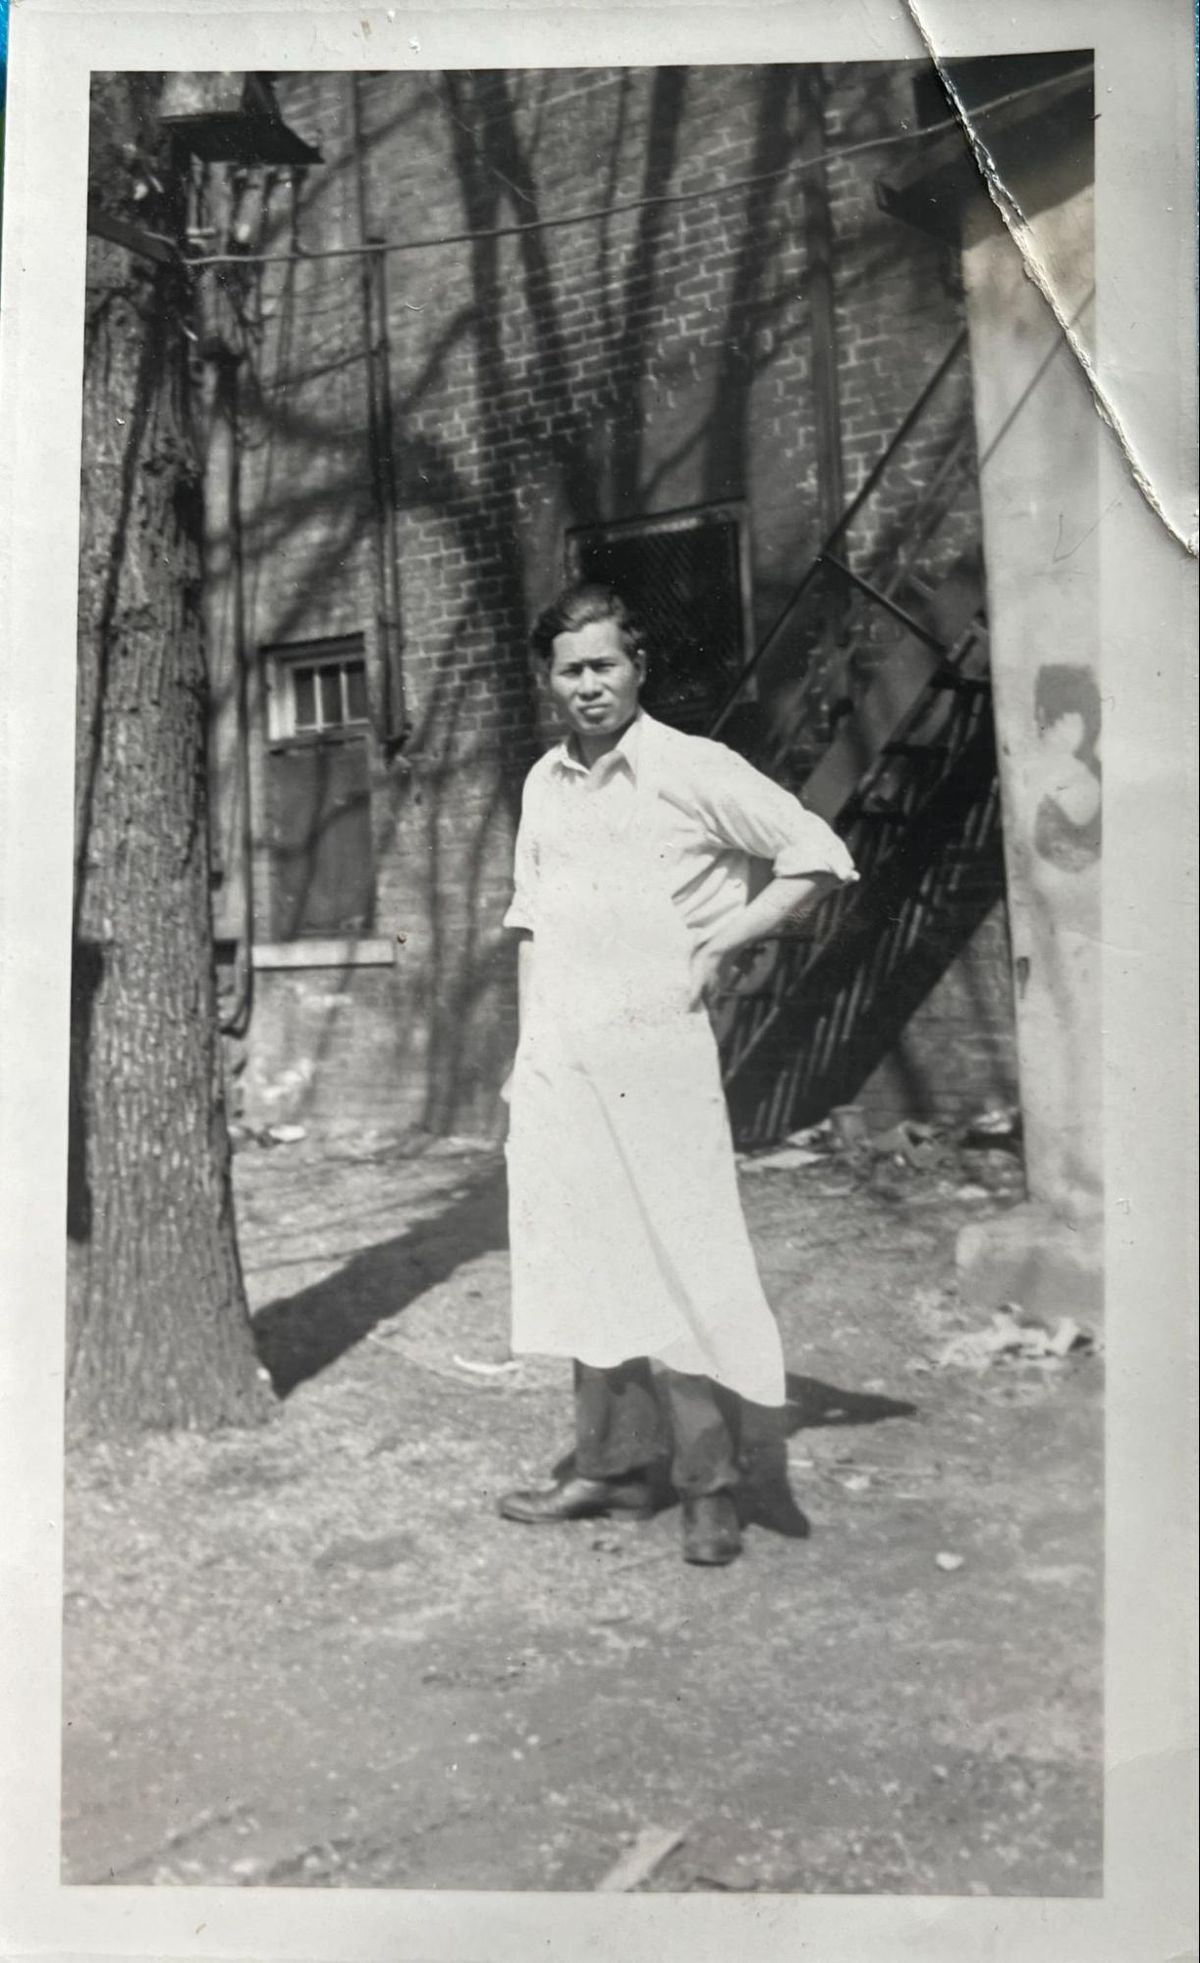 A mean in a white apron standing with arms on sides outside near a tree.